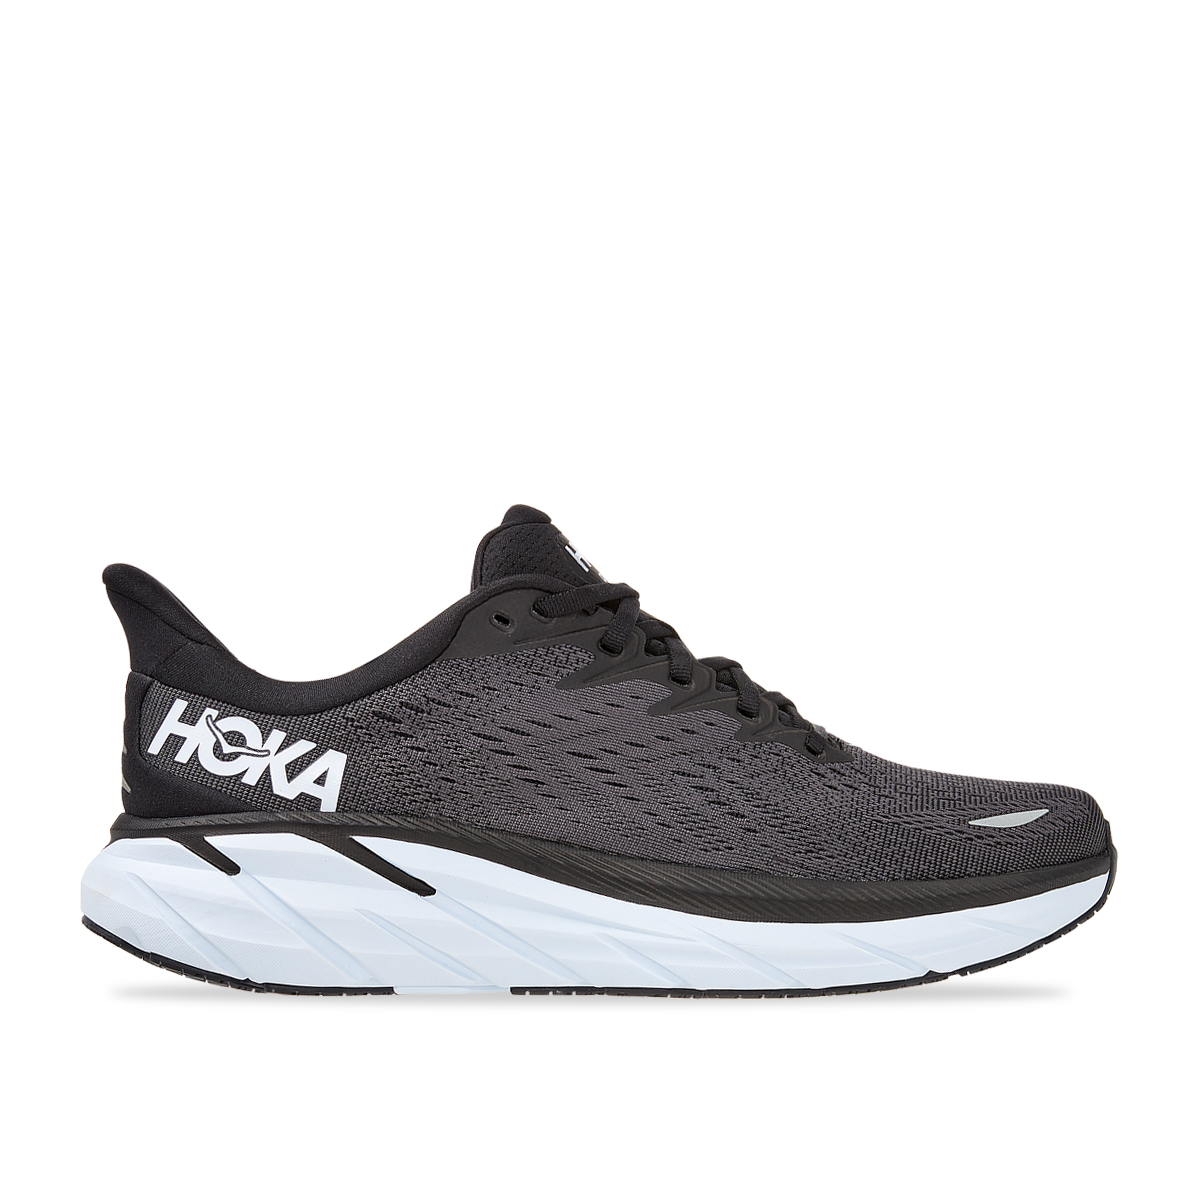 Buy Clifton 8 Running Shoes - Black Online in Qatar | Boutiqaat